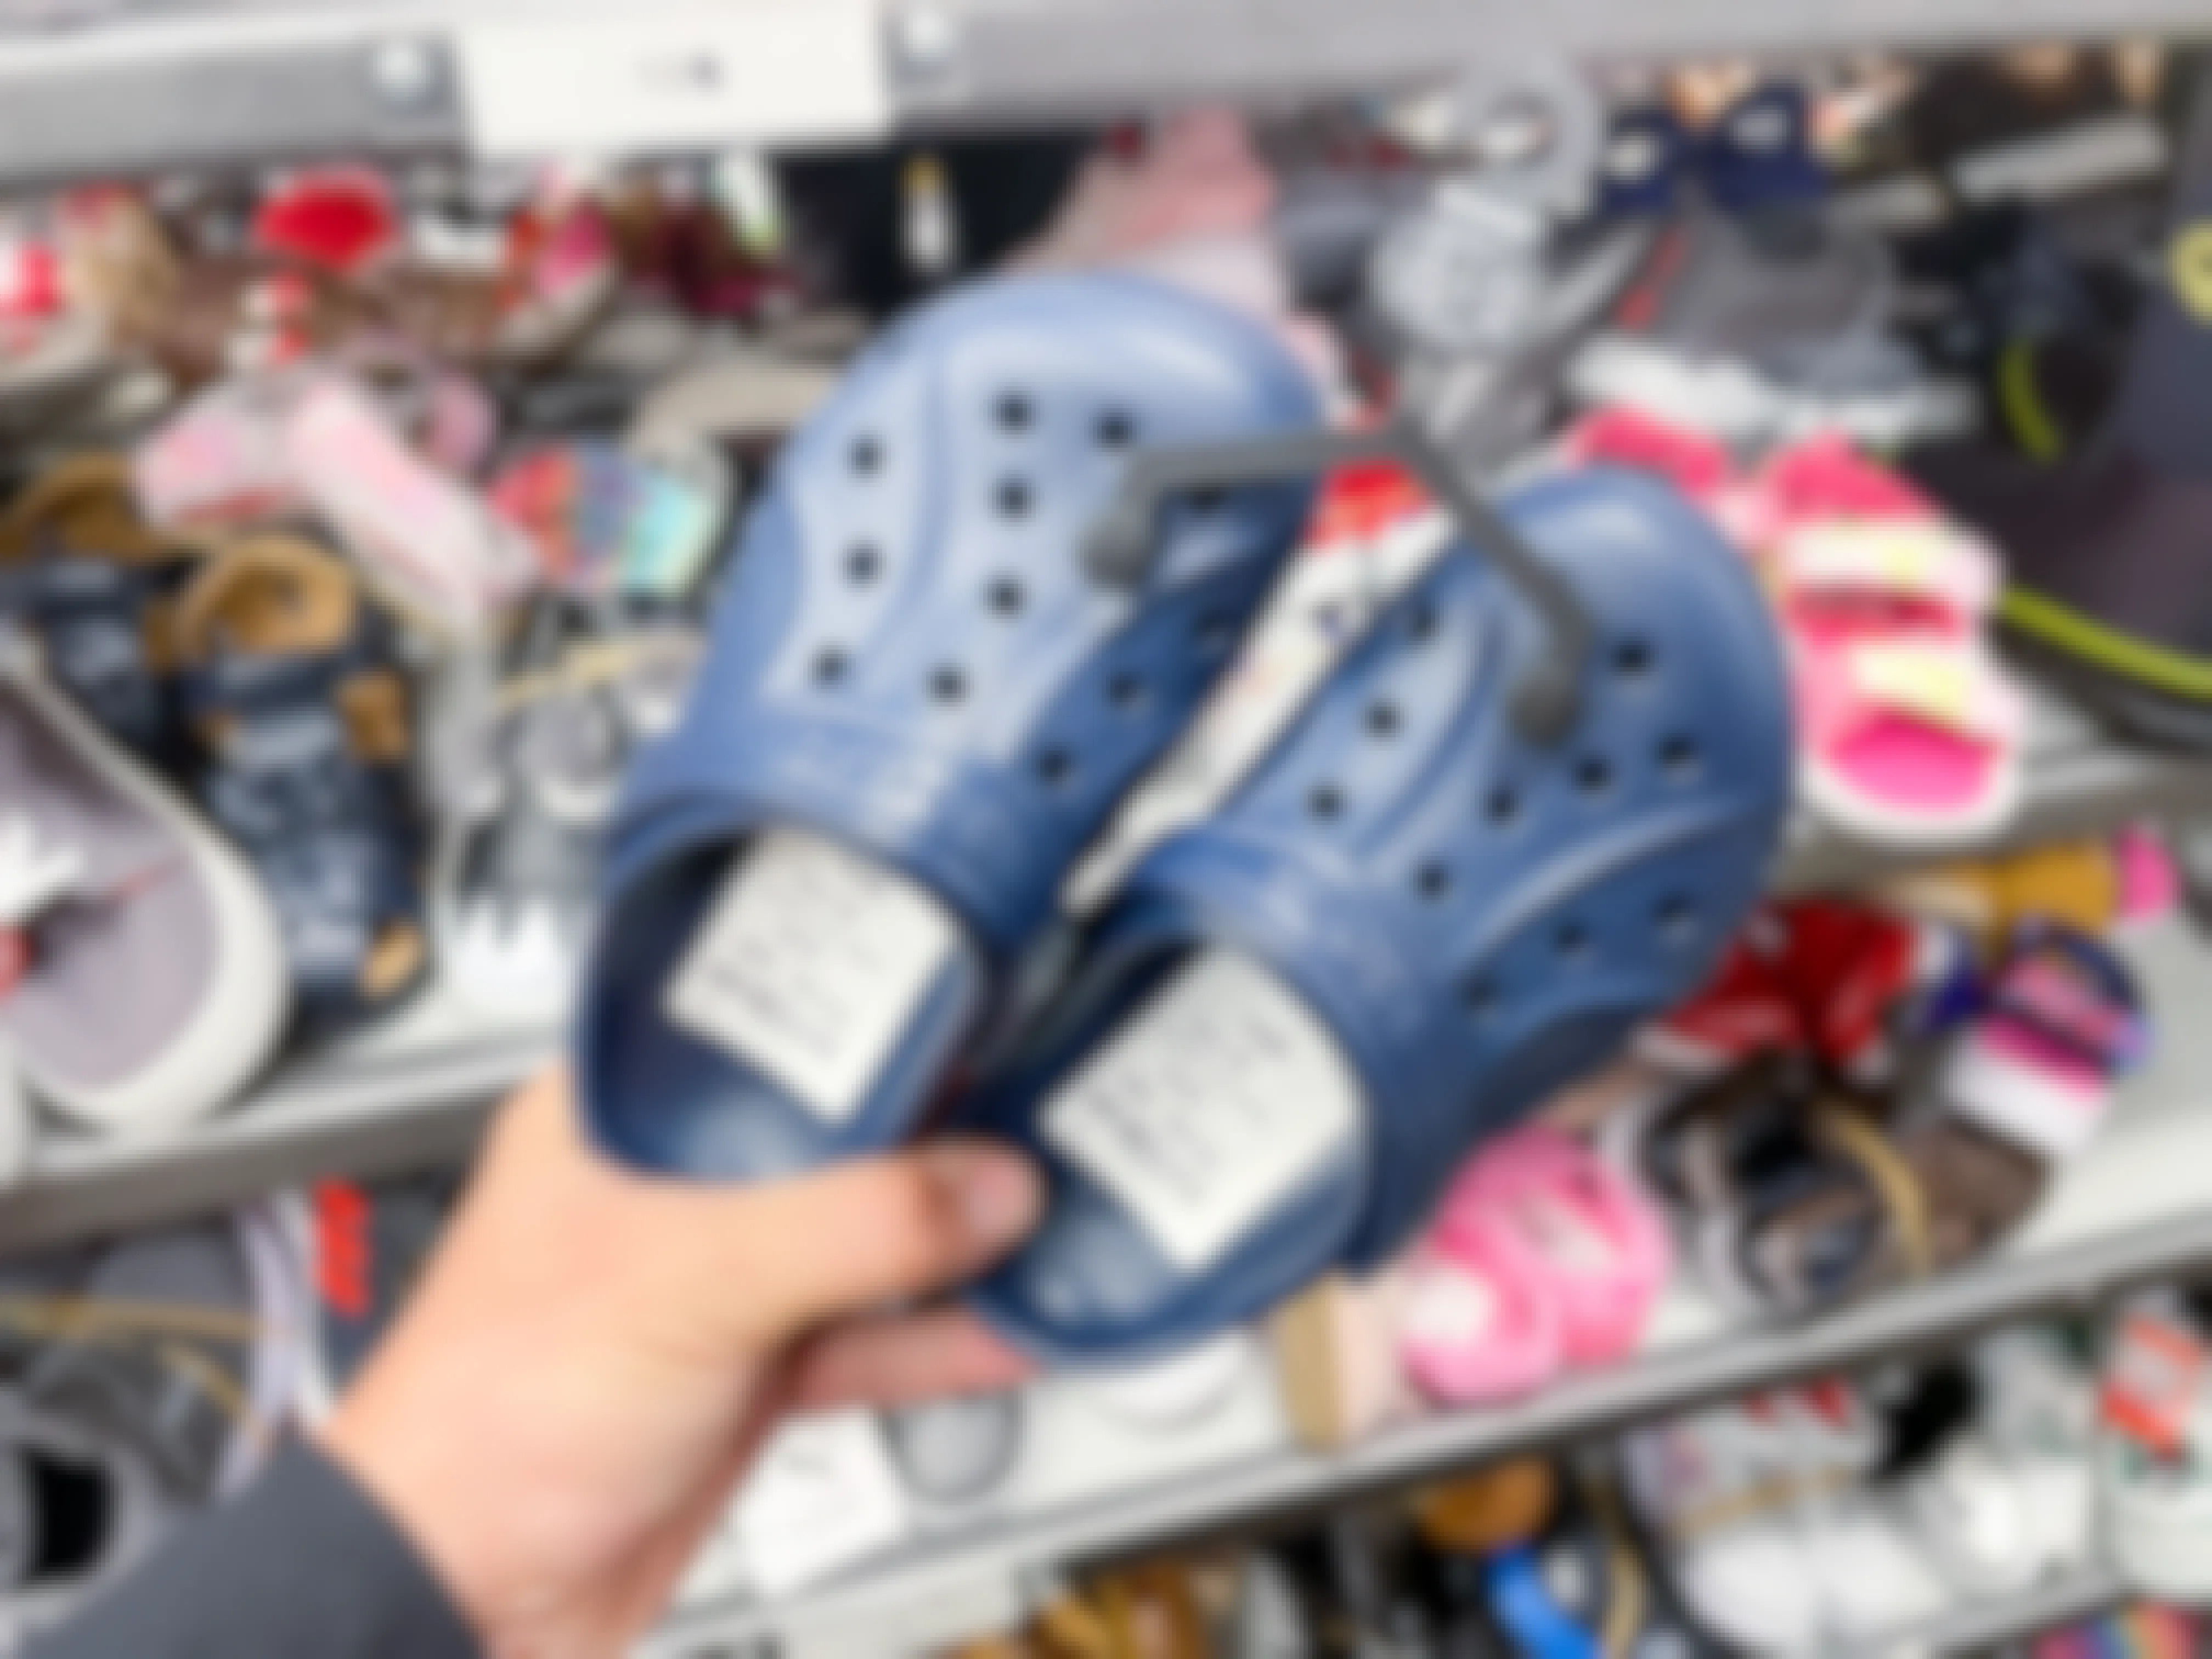 A person's hand holding a pair of kids Crocs in front of more kids shoes on a shelf.